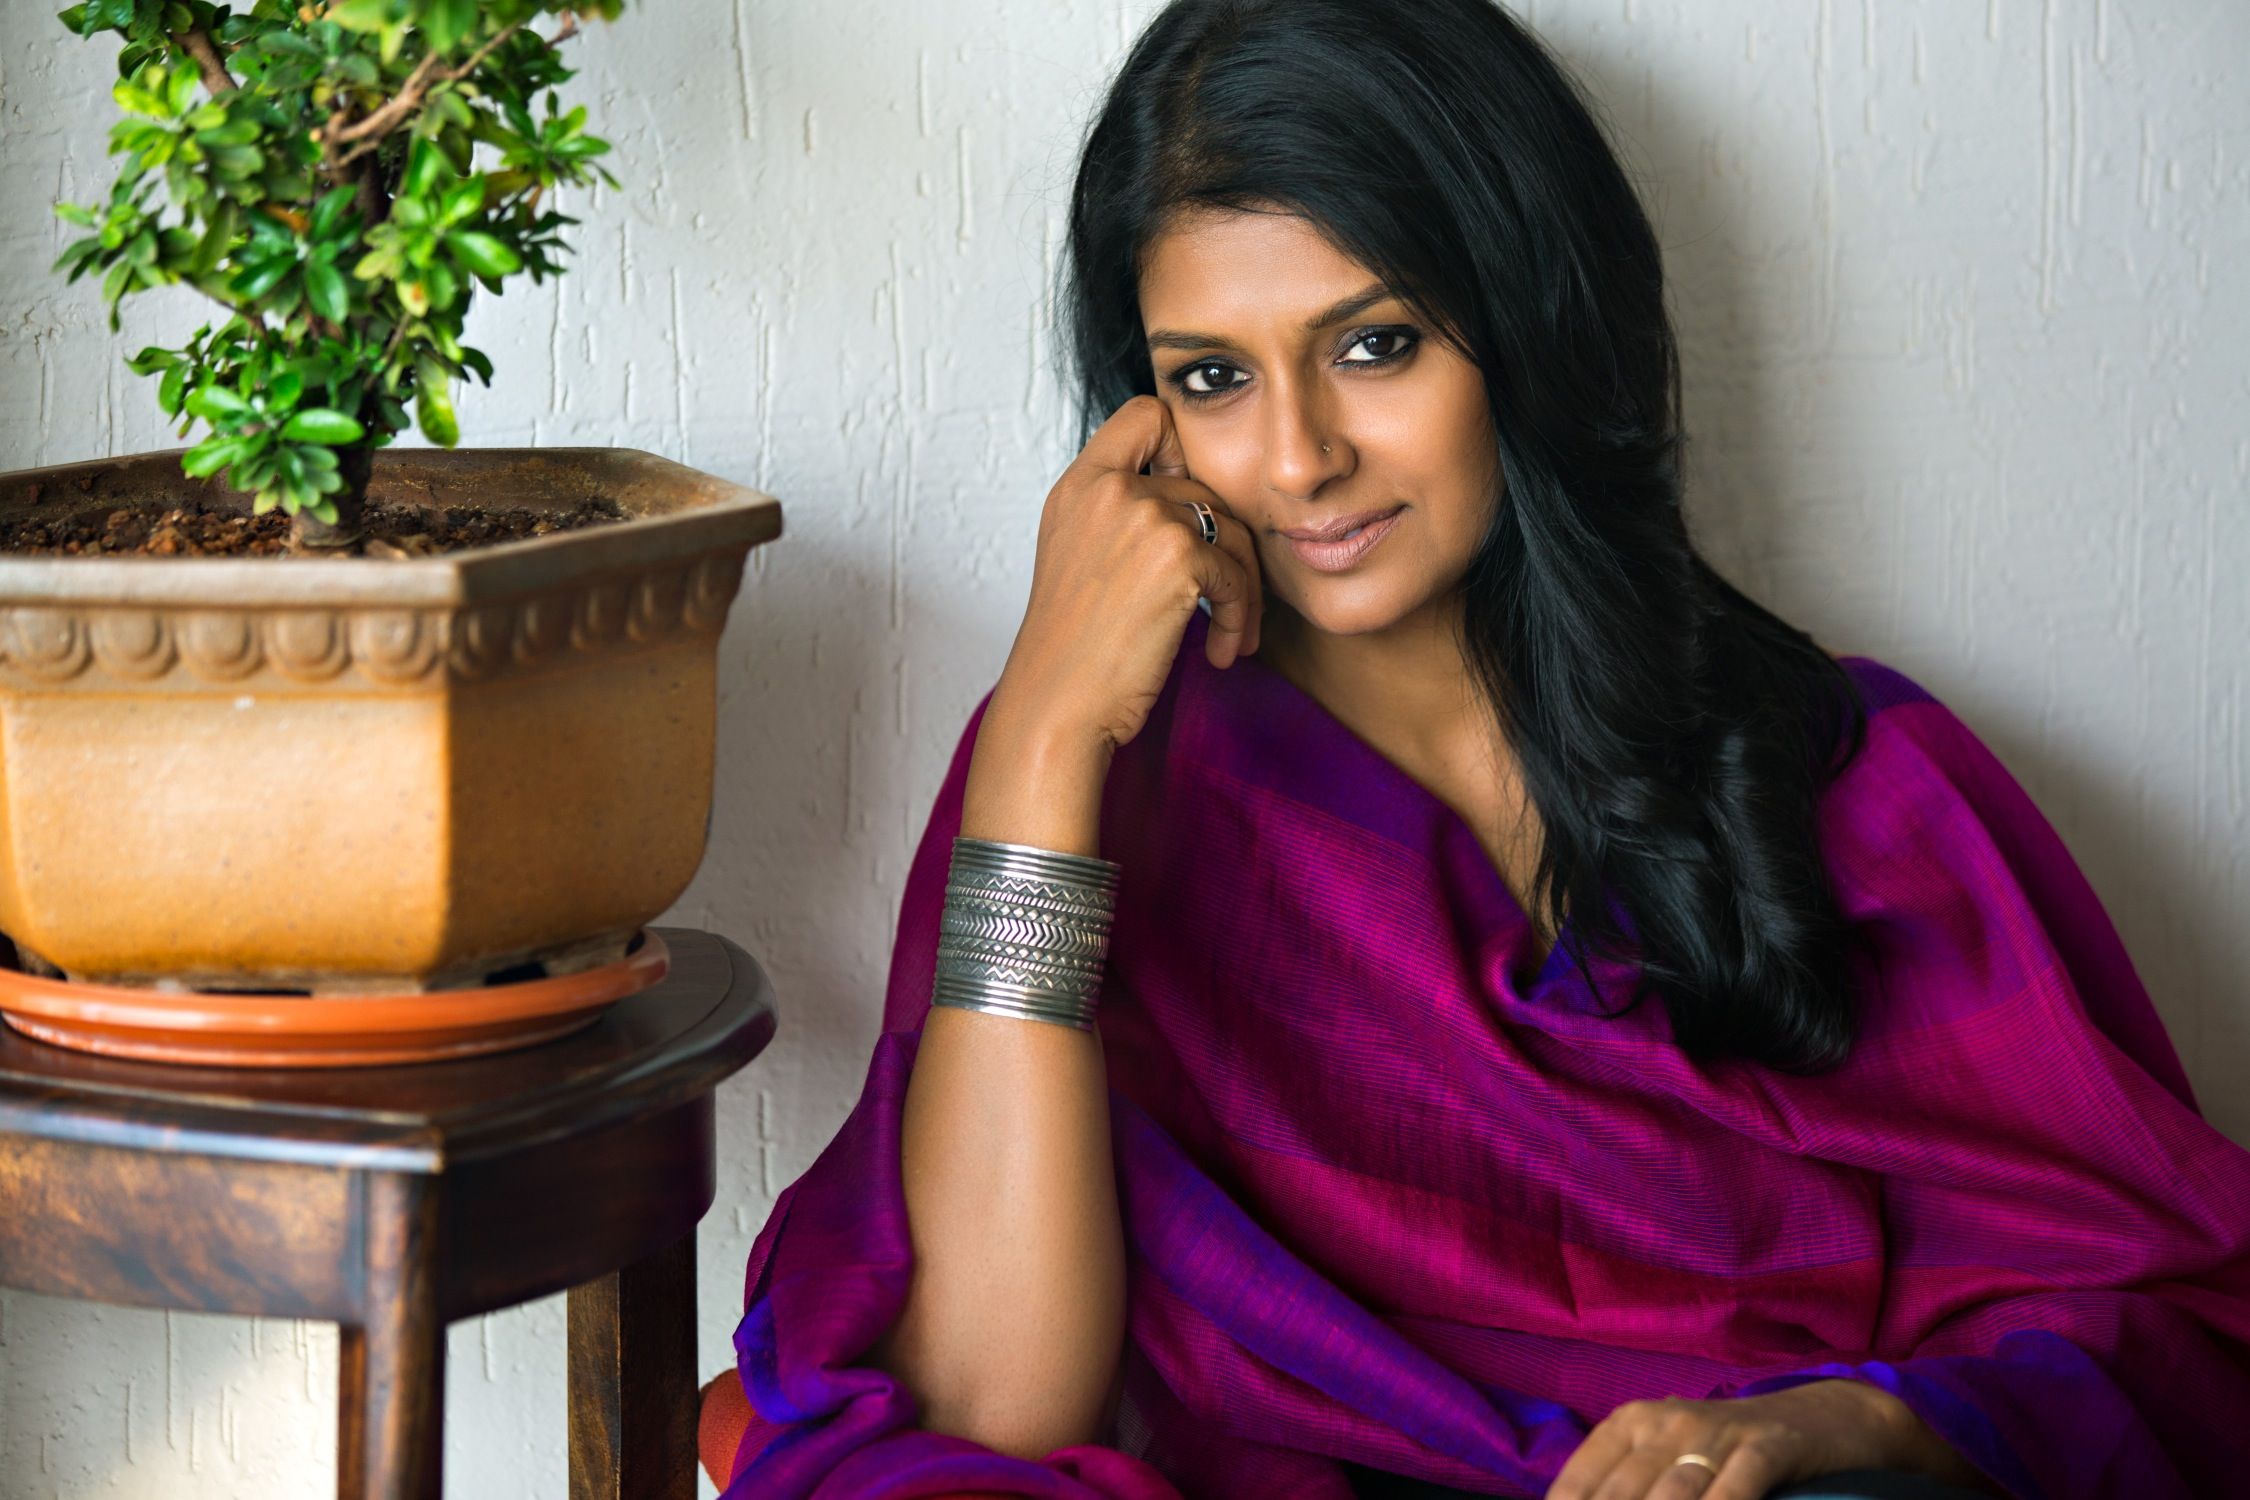 Growing holistically, through acting, directing, writing and advocacy: Nandita Das